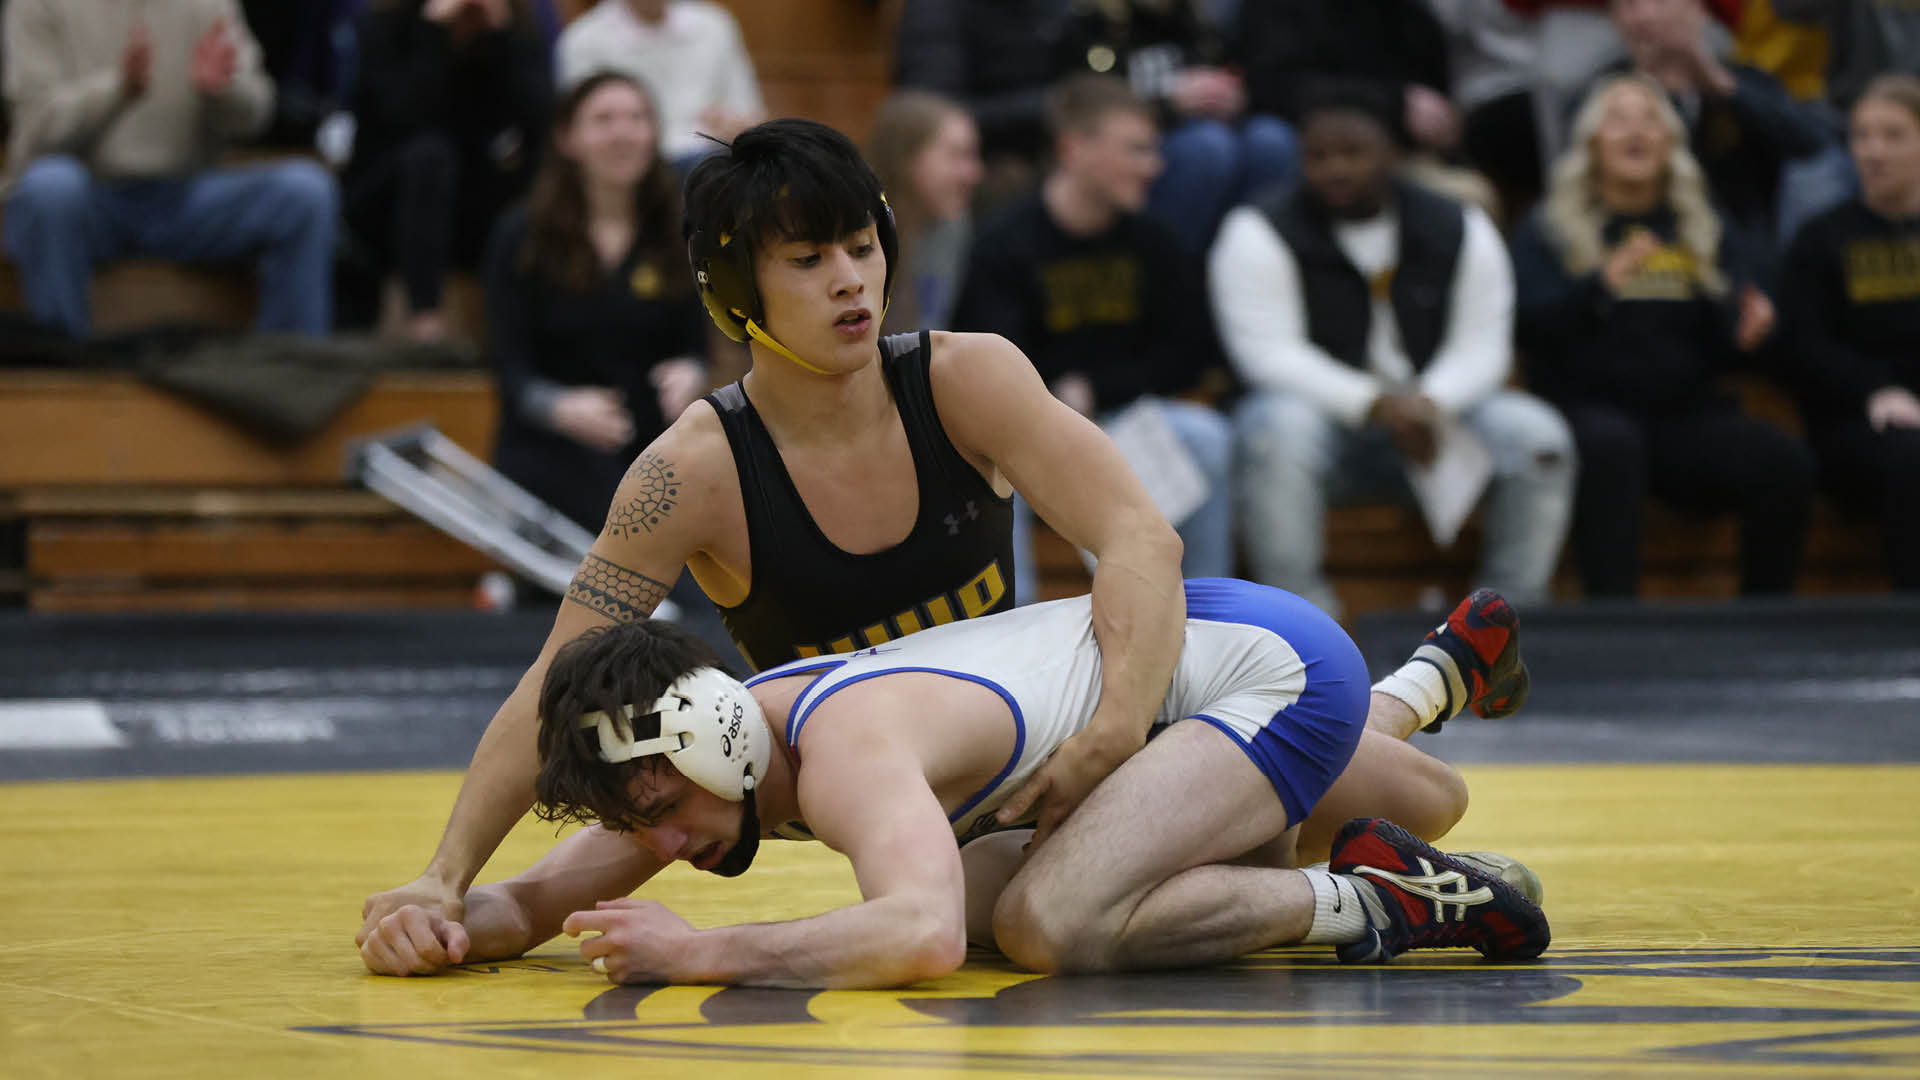 Valdez and Yineman Post Victories as Titans Fall to Pioneers